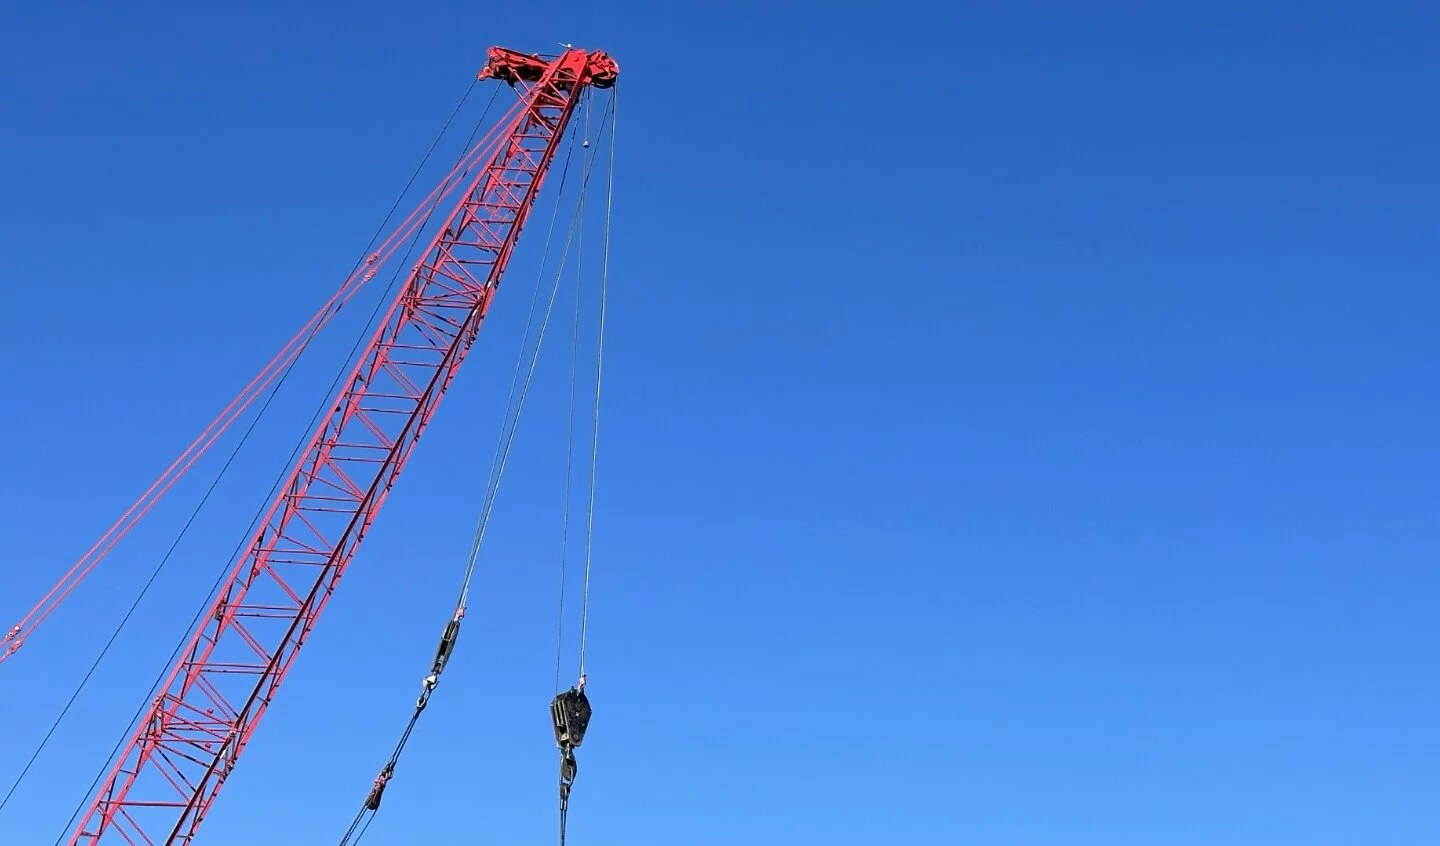 Photo of Crane with the sky background, photo taken on a sunny day.